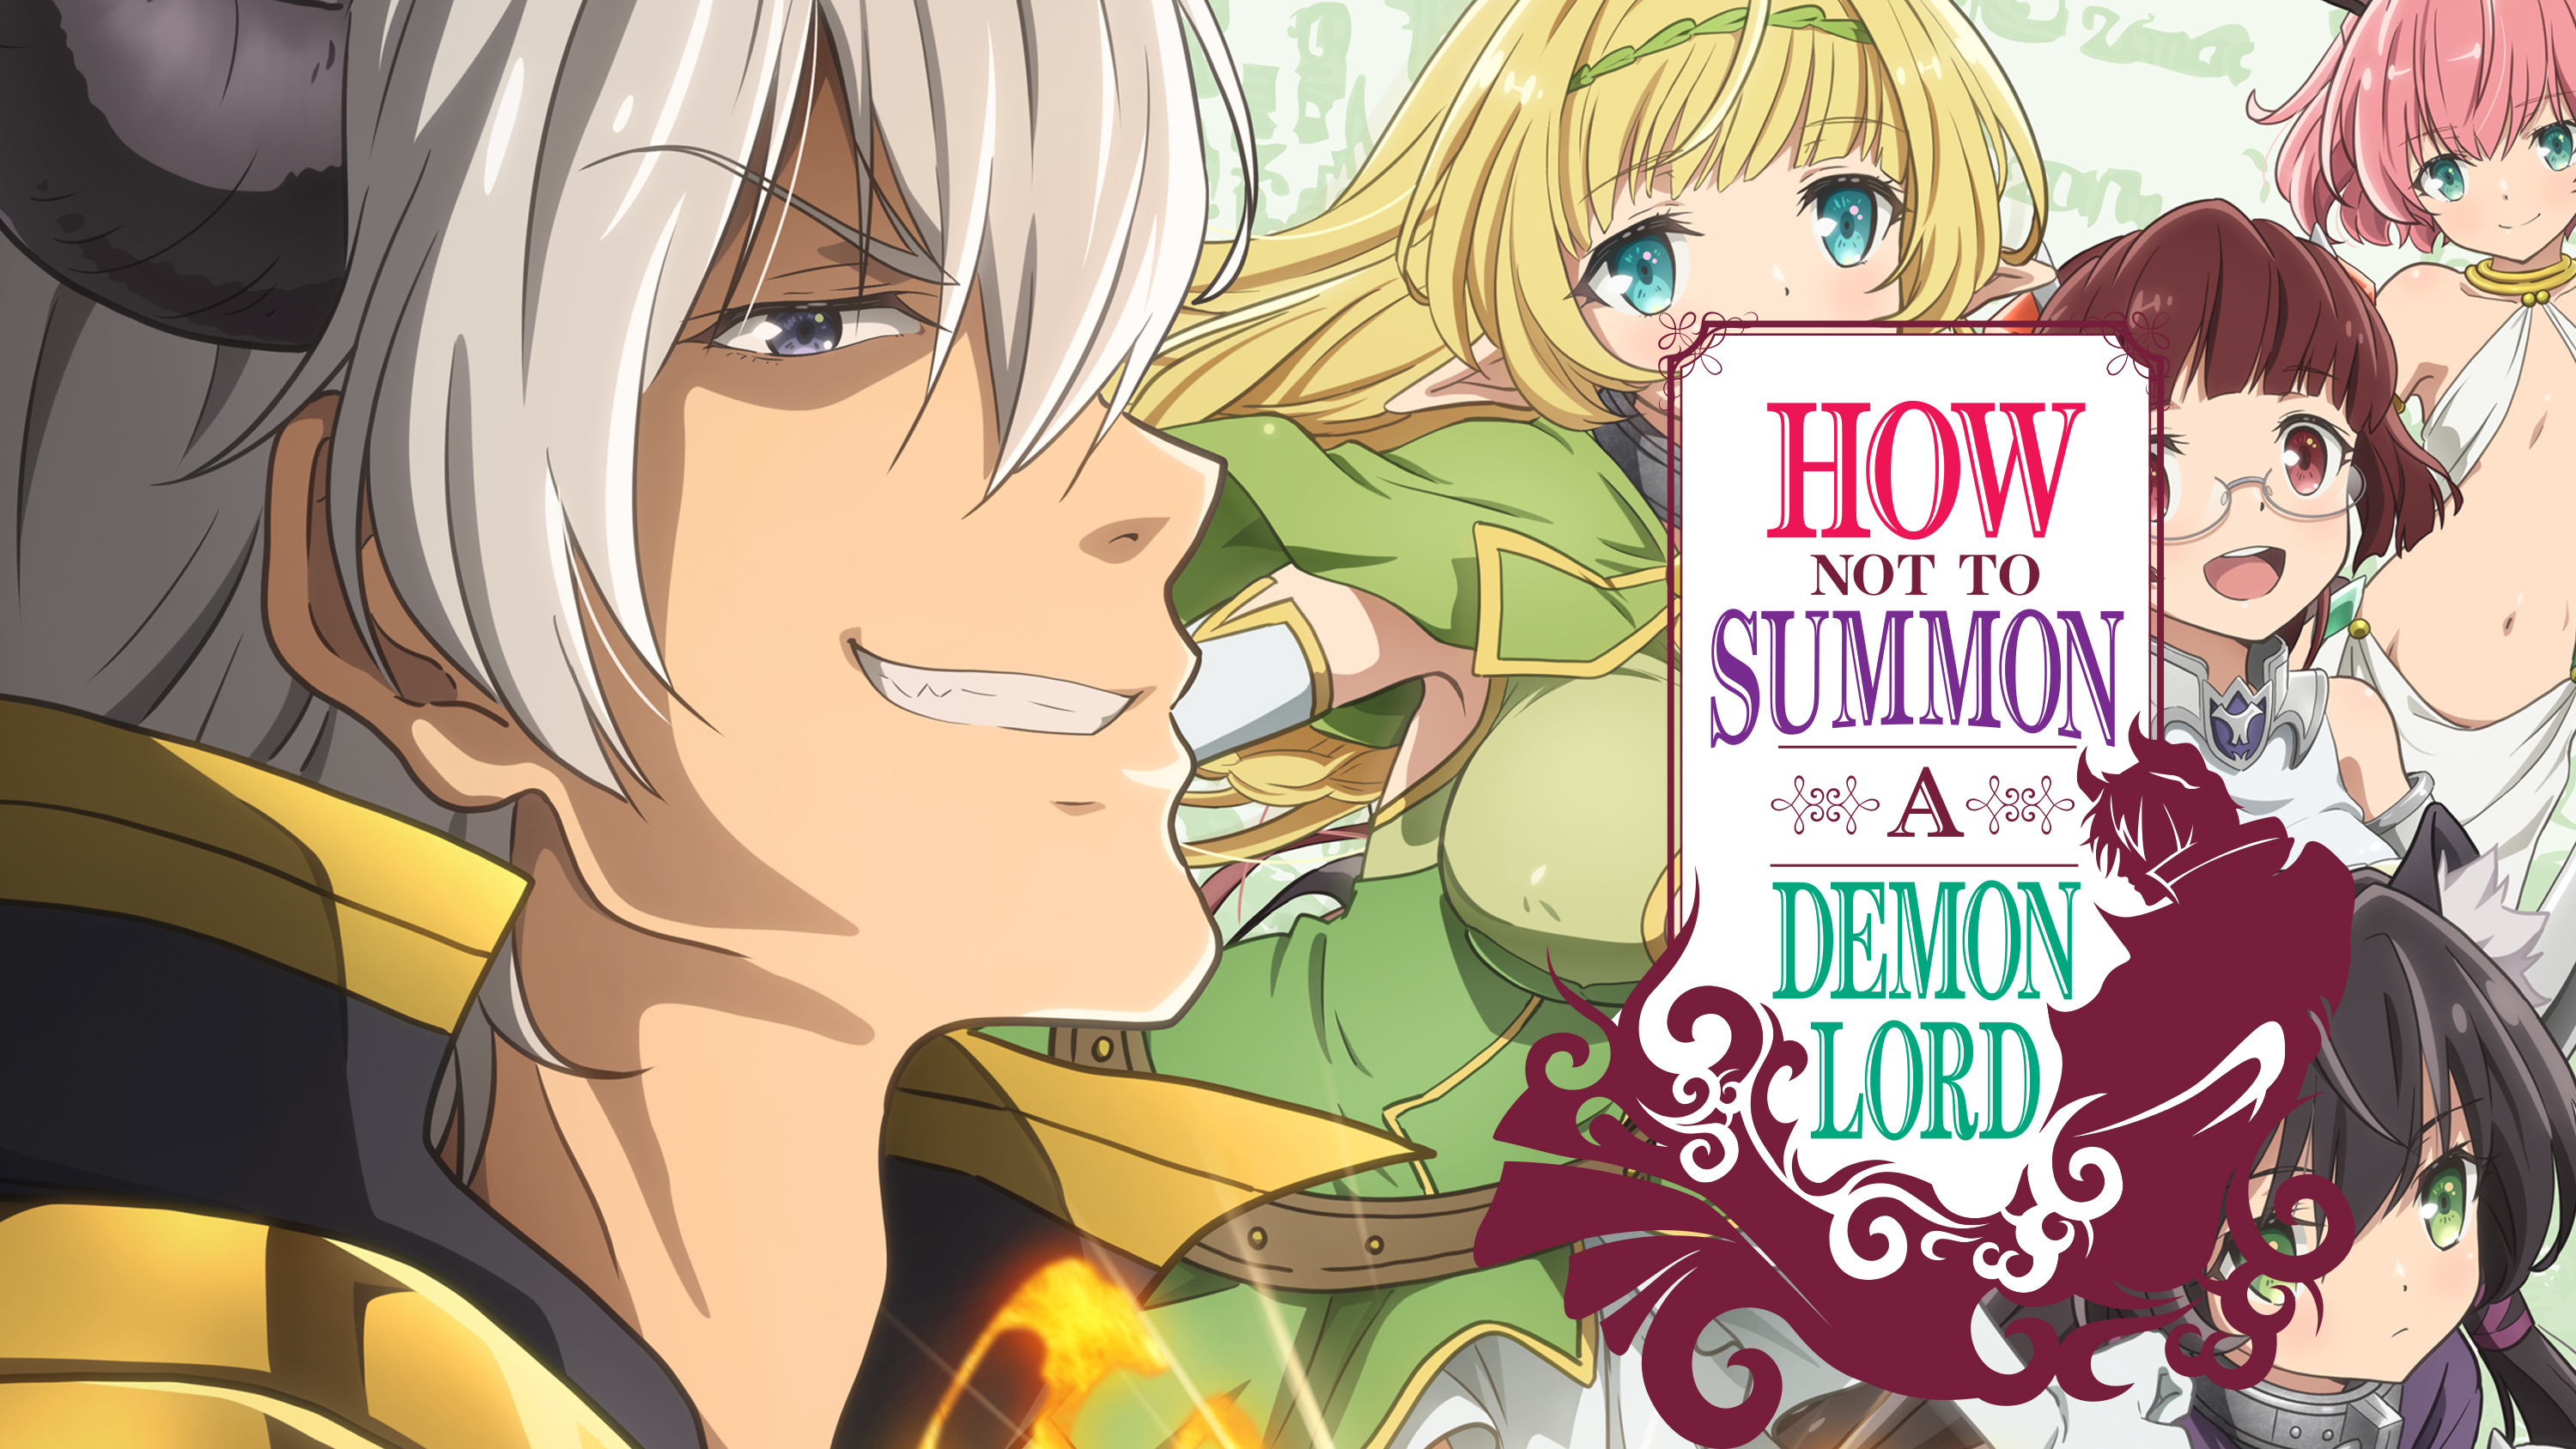 How NOT to Summon a Demon Lord HD Wallpaper. Background Image